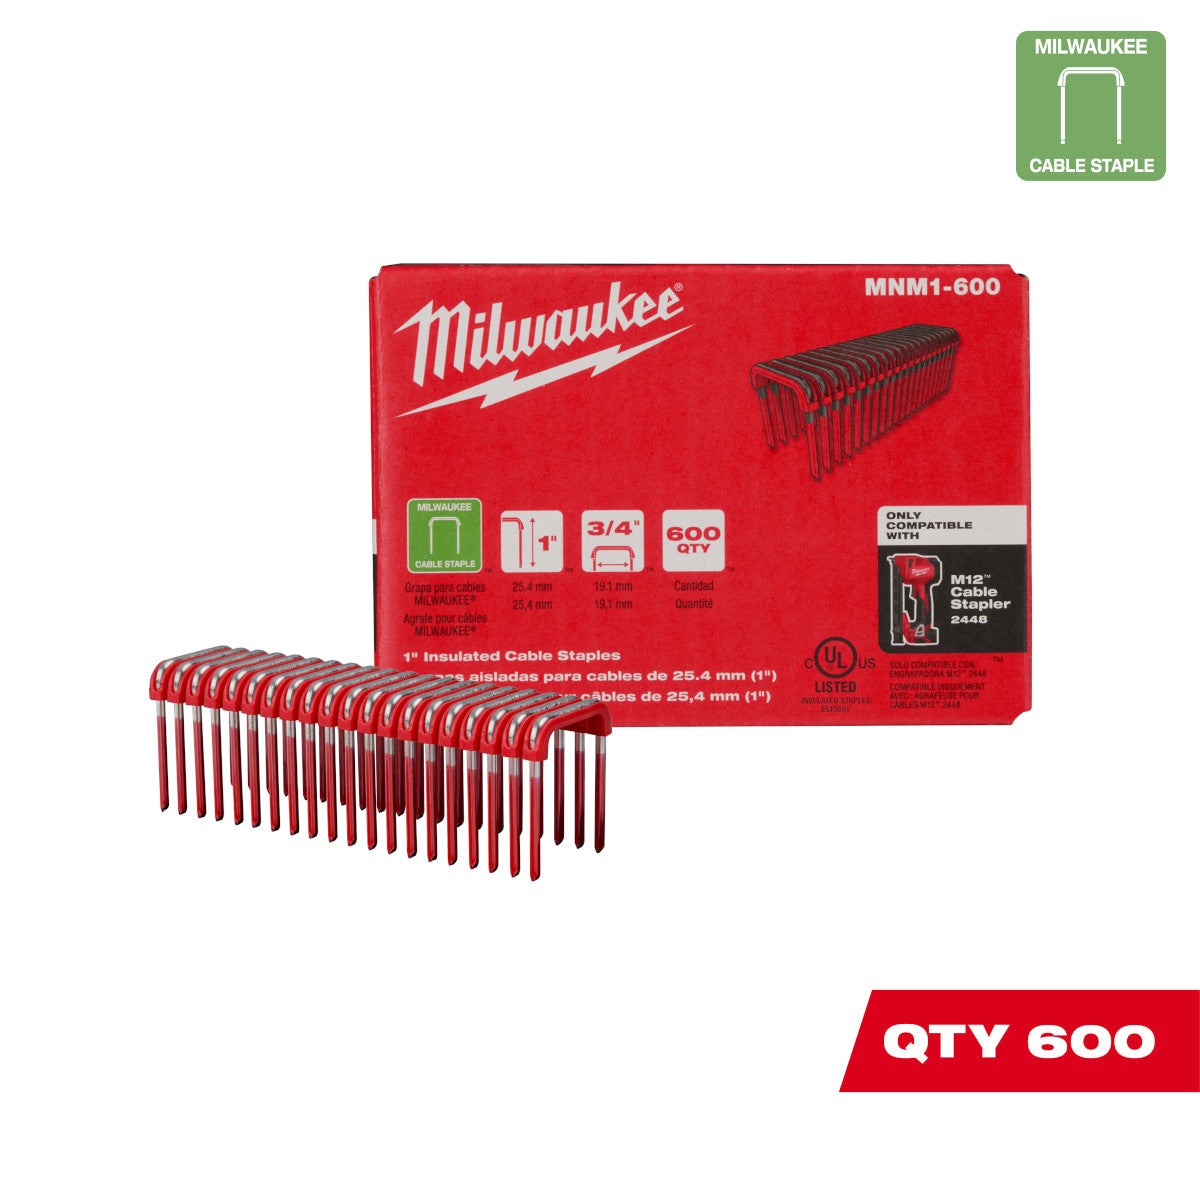 Milwaukee MNM1-600 1" Insulated Cable Staples